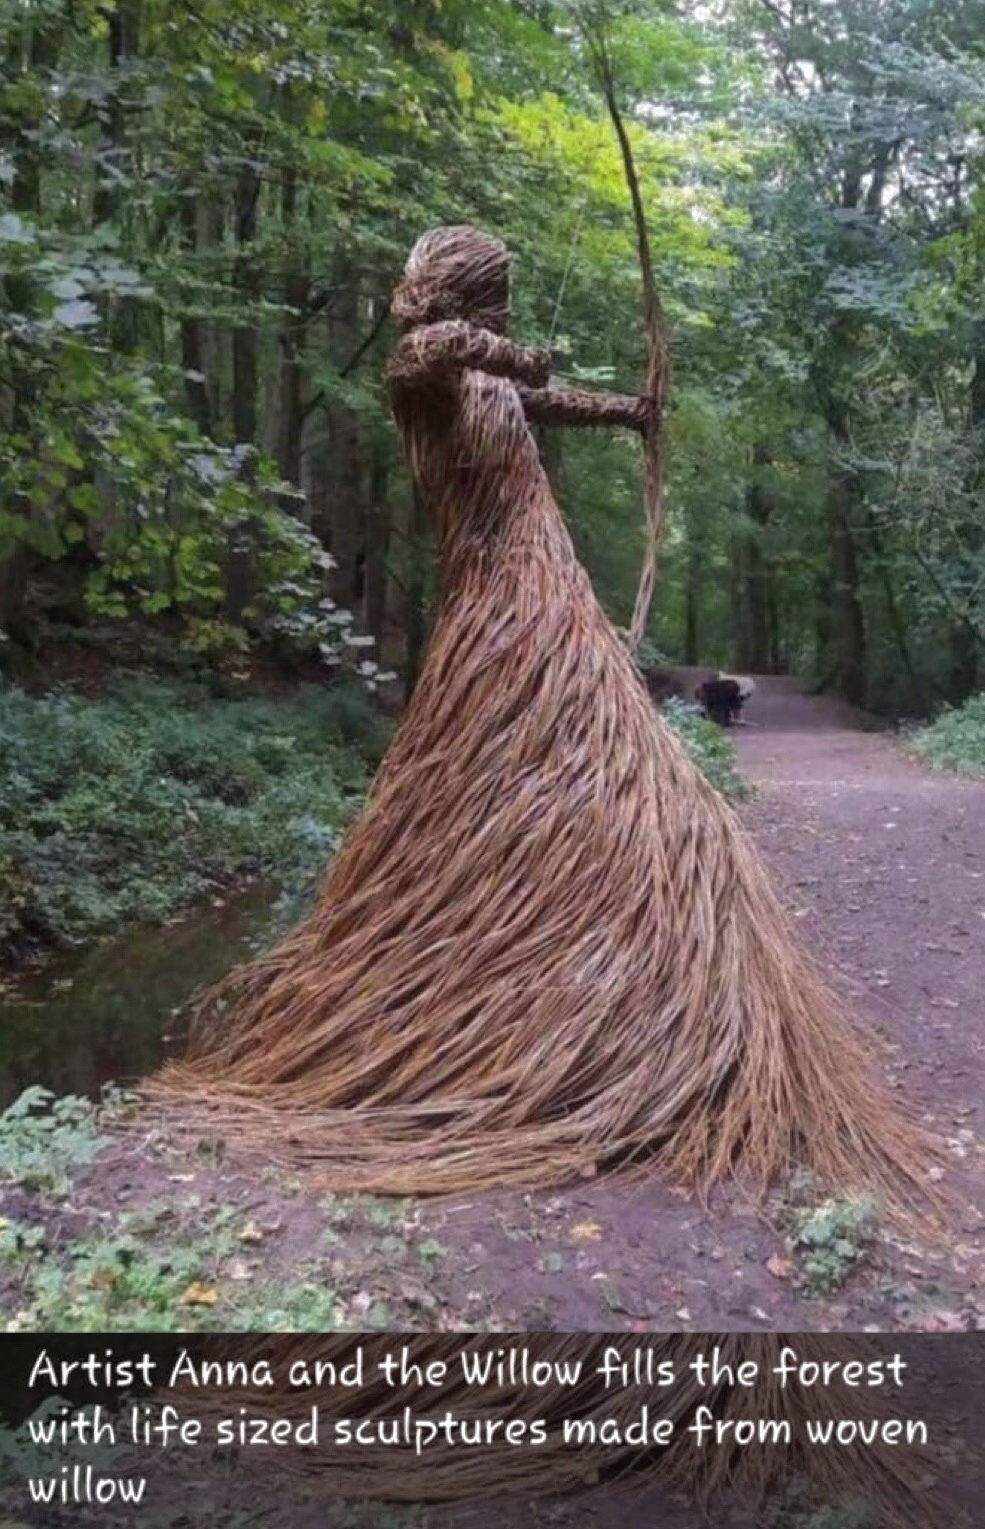 sentinel of the forest - Artist Anna and the Willow fills the forest with life sized sculptures made from woven willow